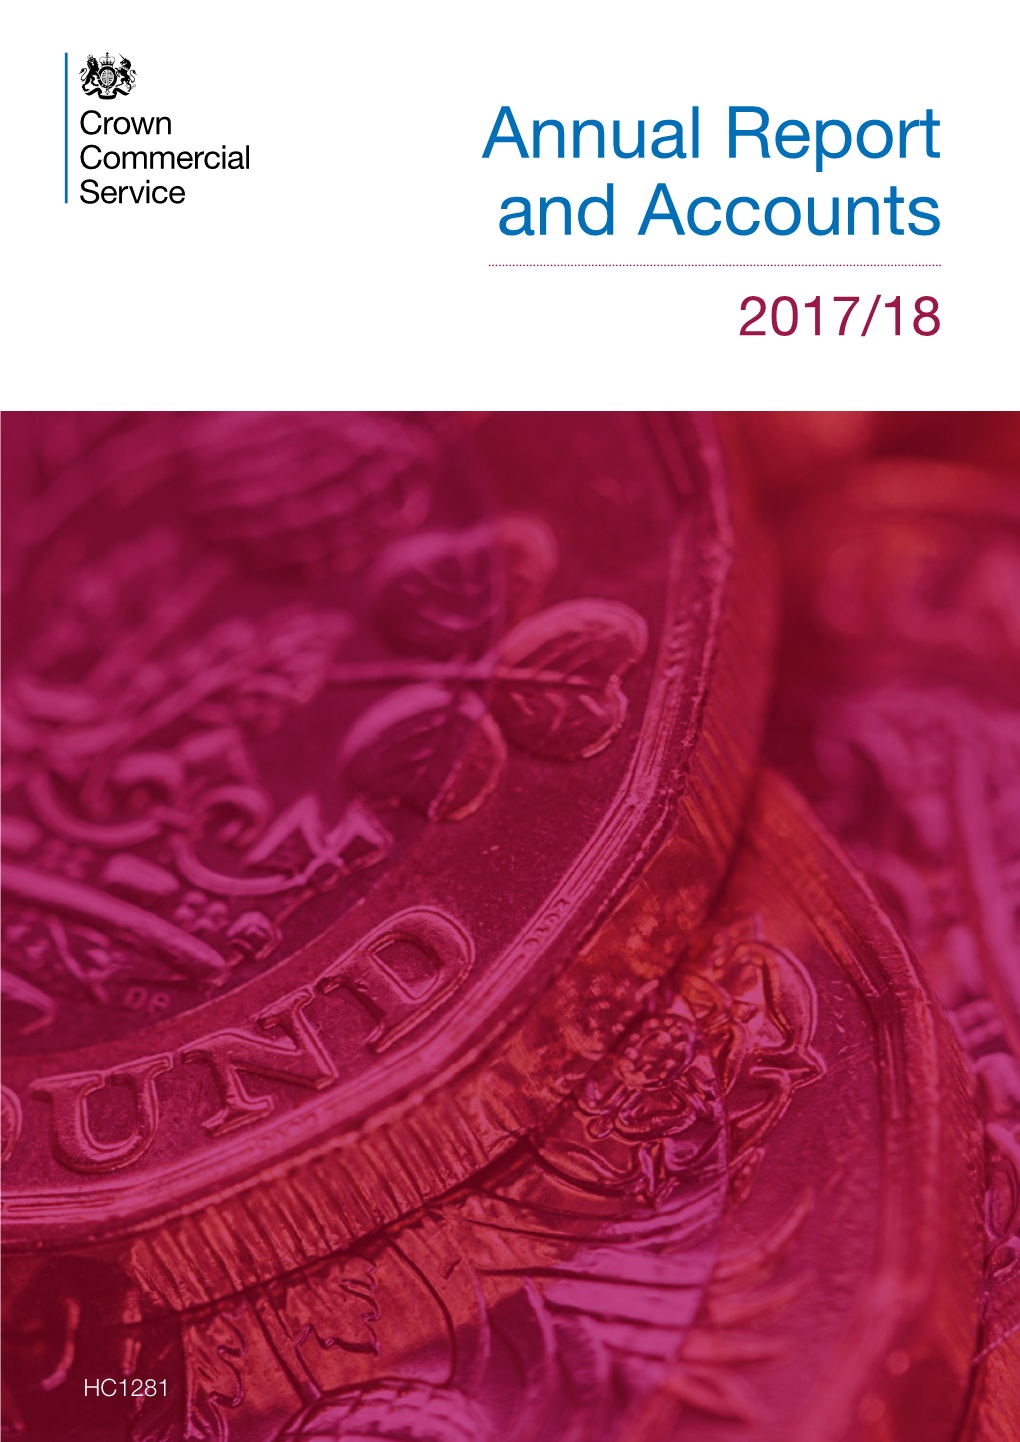 Crown Commercial Service Annual Report and Accounts 2017/18